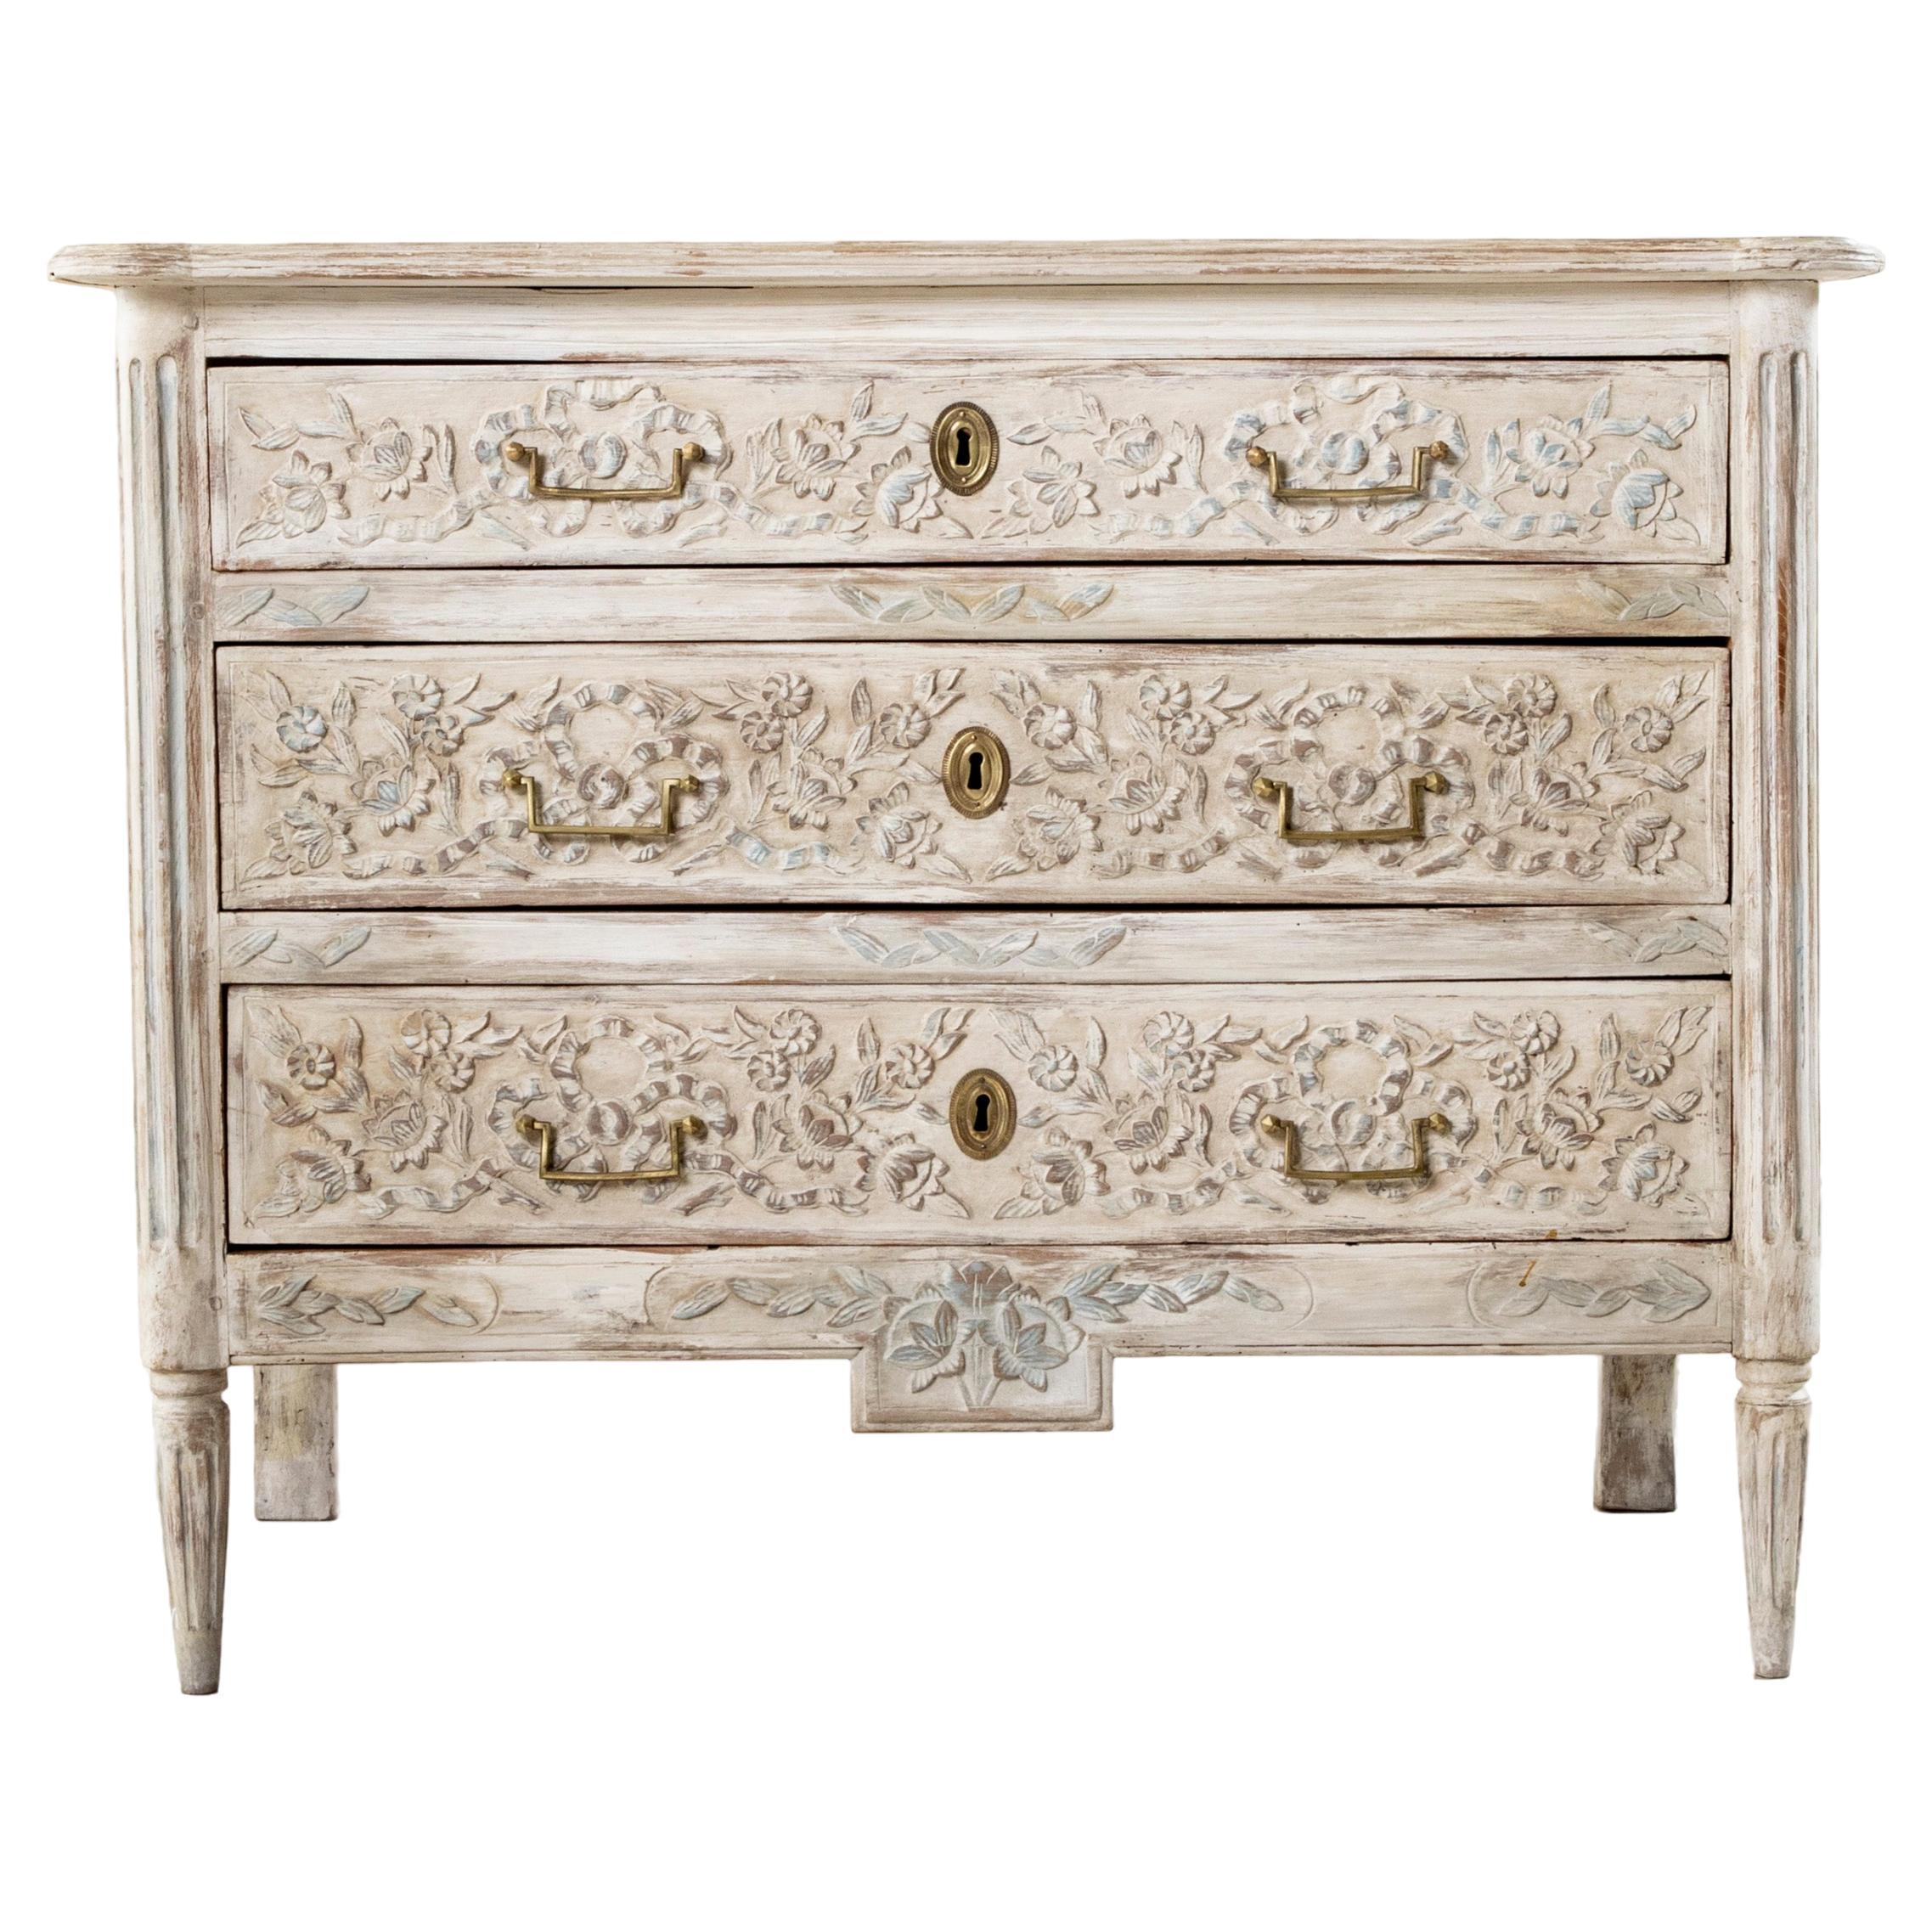 Late 18th Century French Louis XVI Period Painted Hand-Carved Chest, Commode